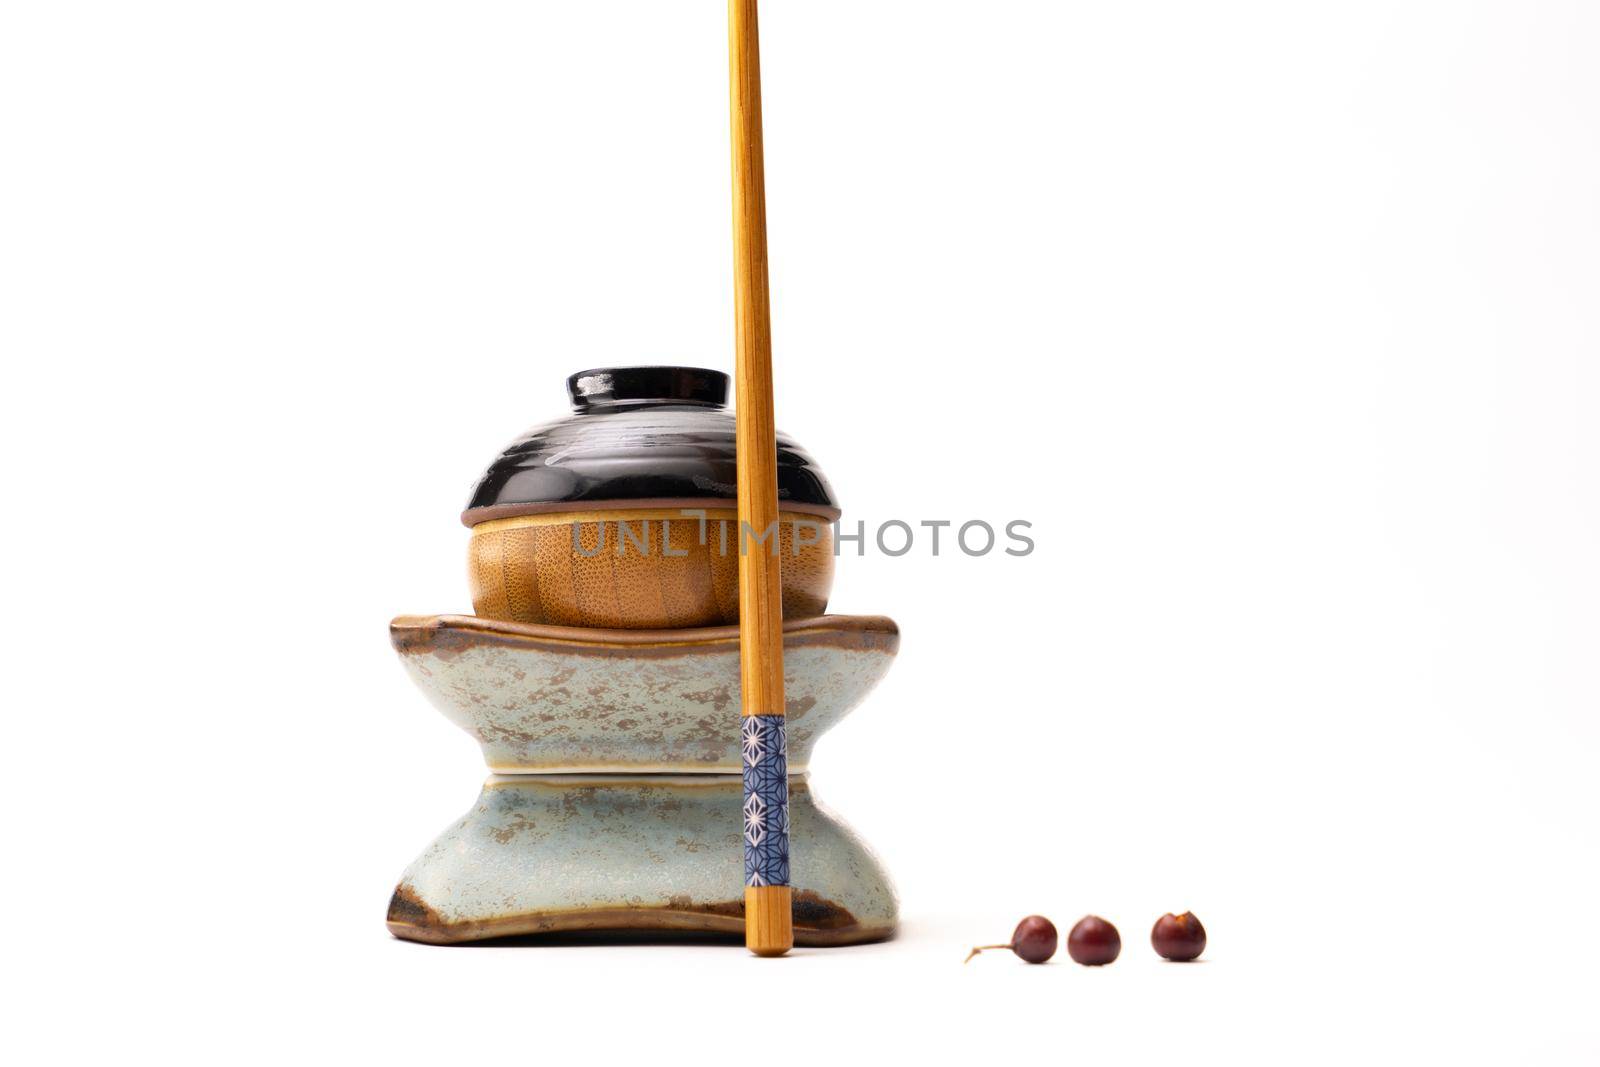 A still life of a japanese figure built from cups and a chopstick isolated on a white background